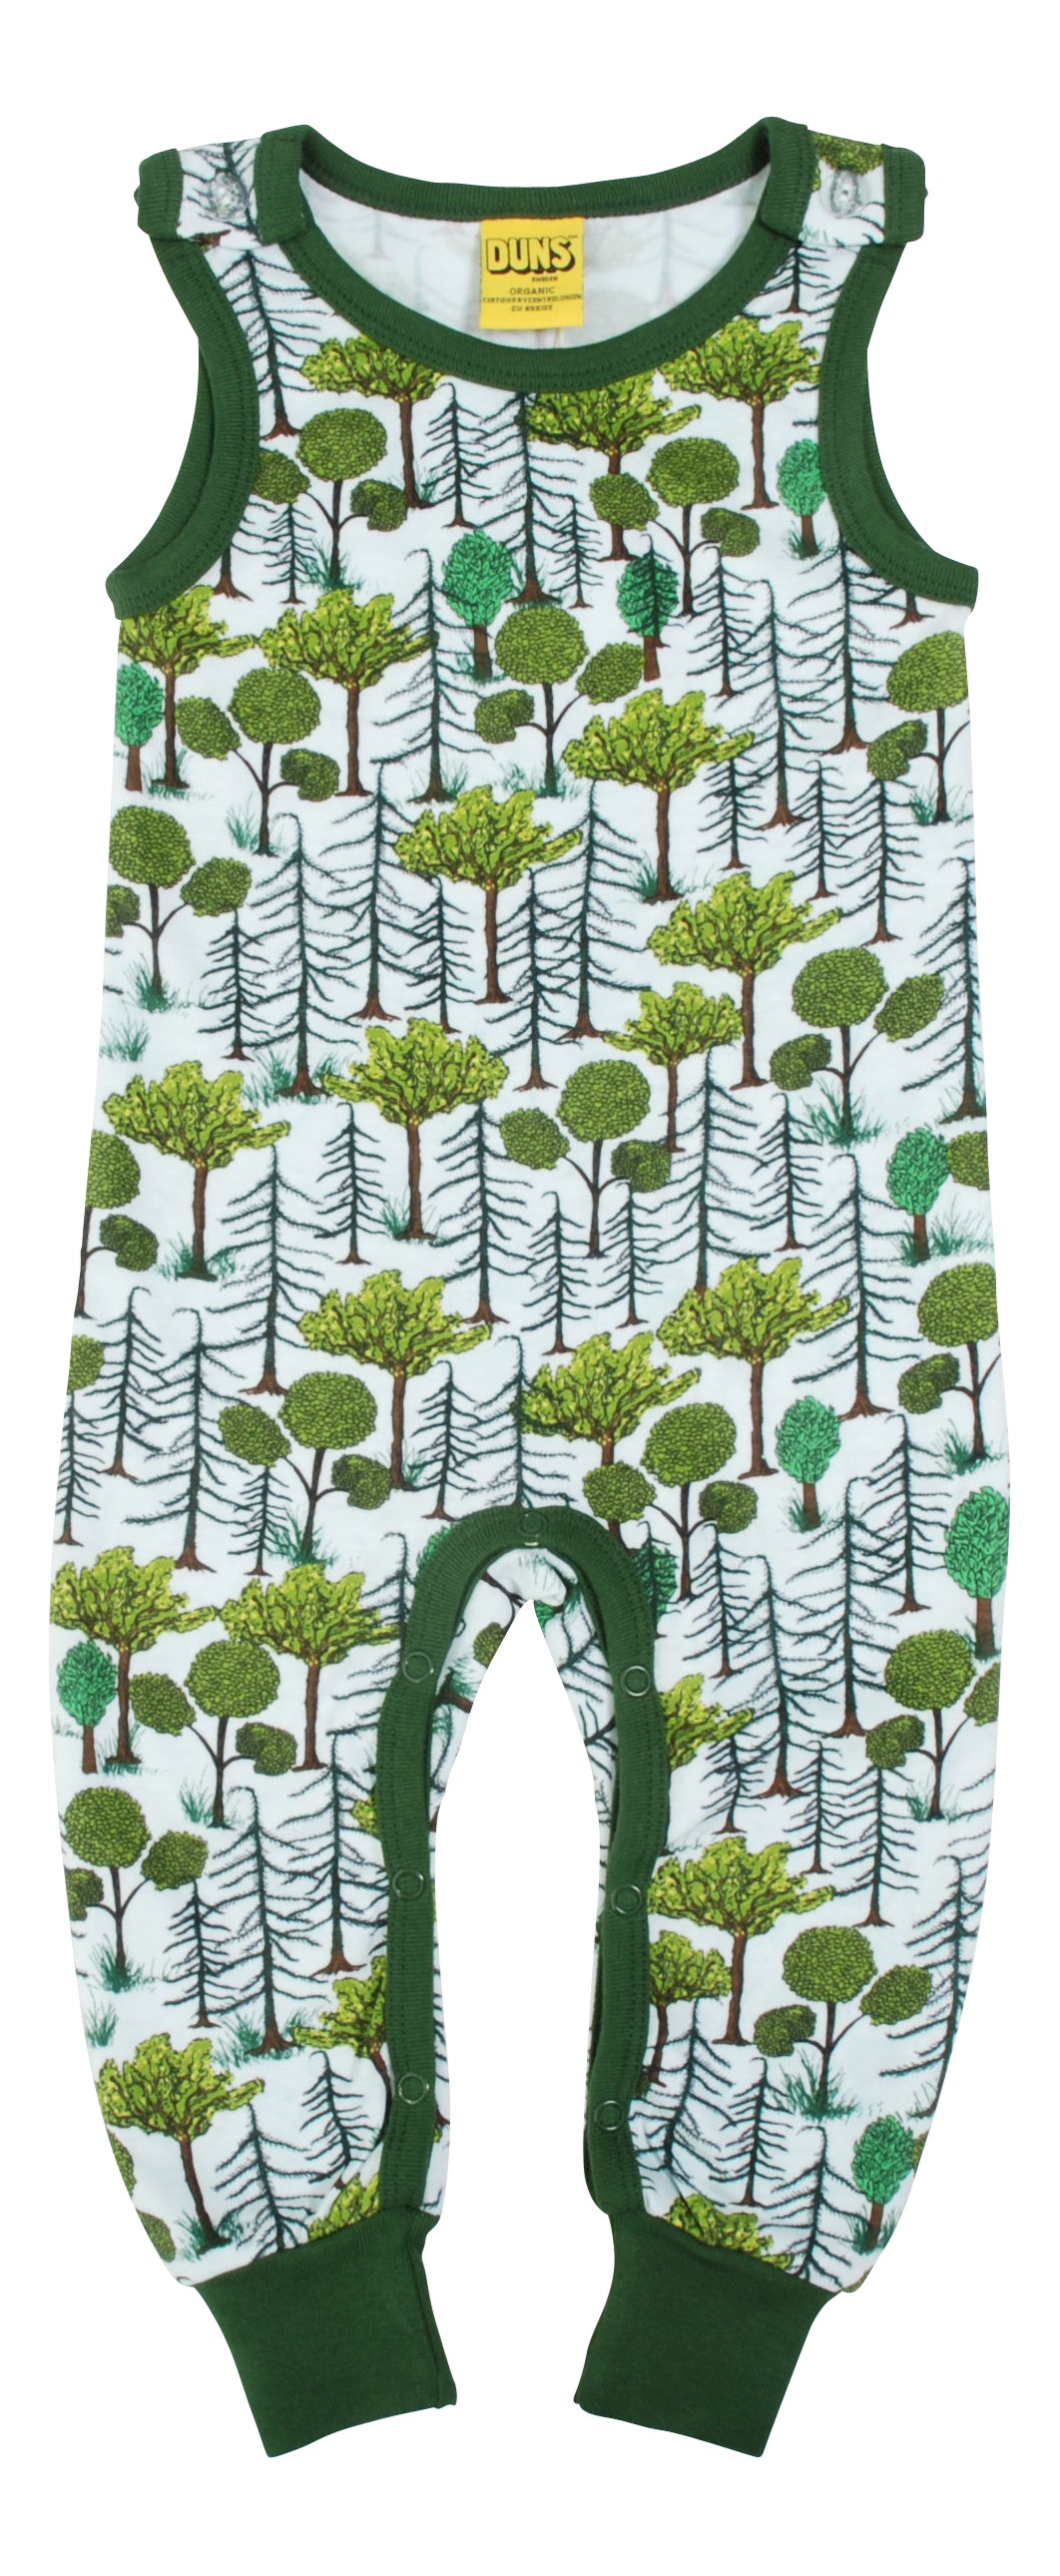 Duns Sweden - Dungaree Enchanted Forest - Betoved Bos